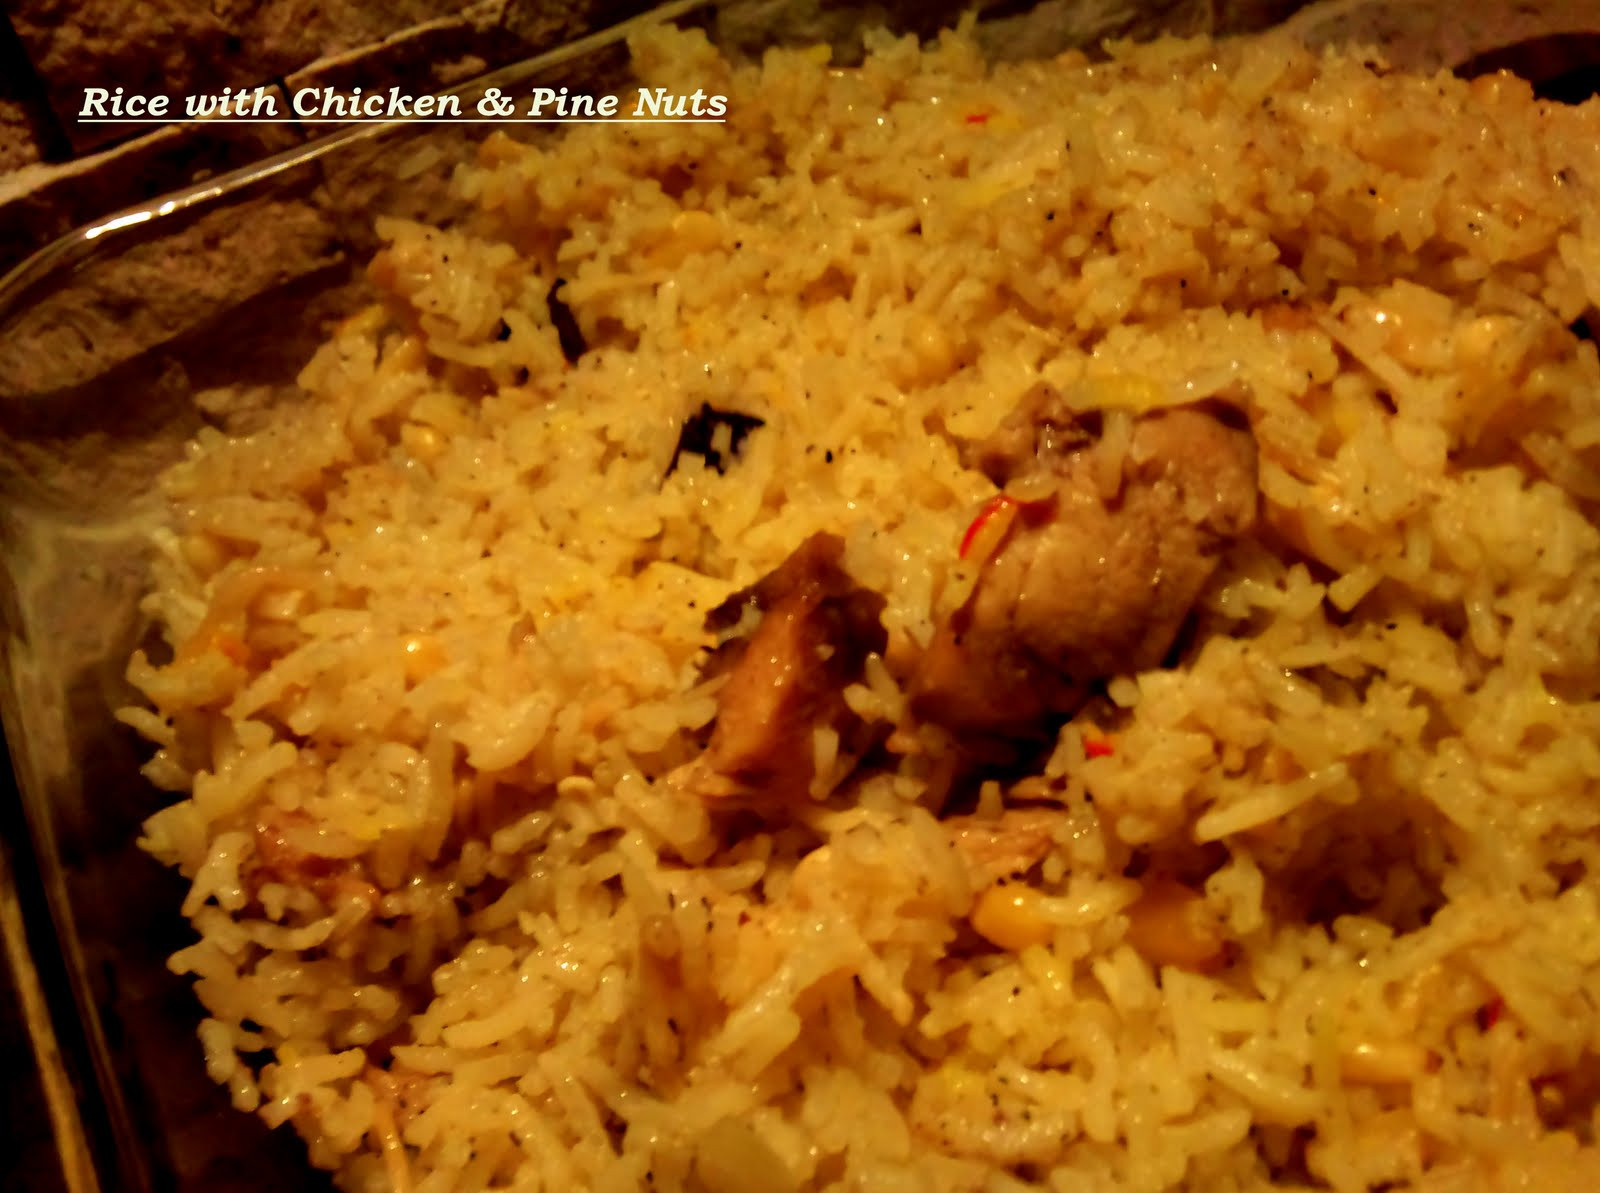 Middle Eastern Chicken And Rice Recipes
 middle eastern chicken and rice